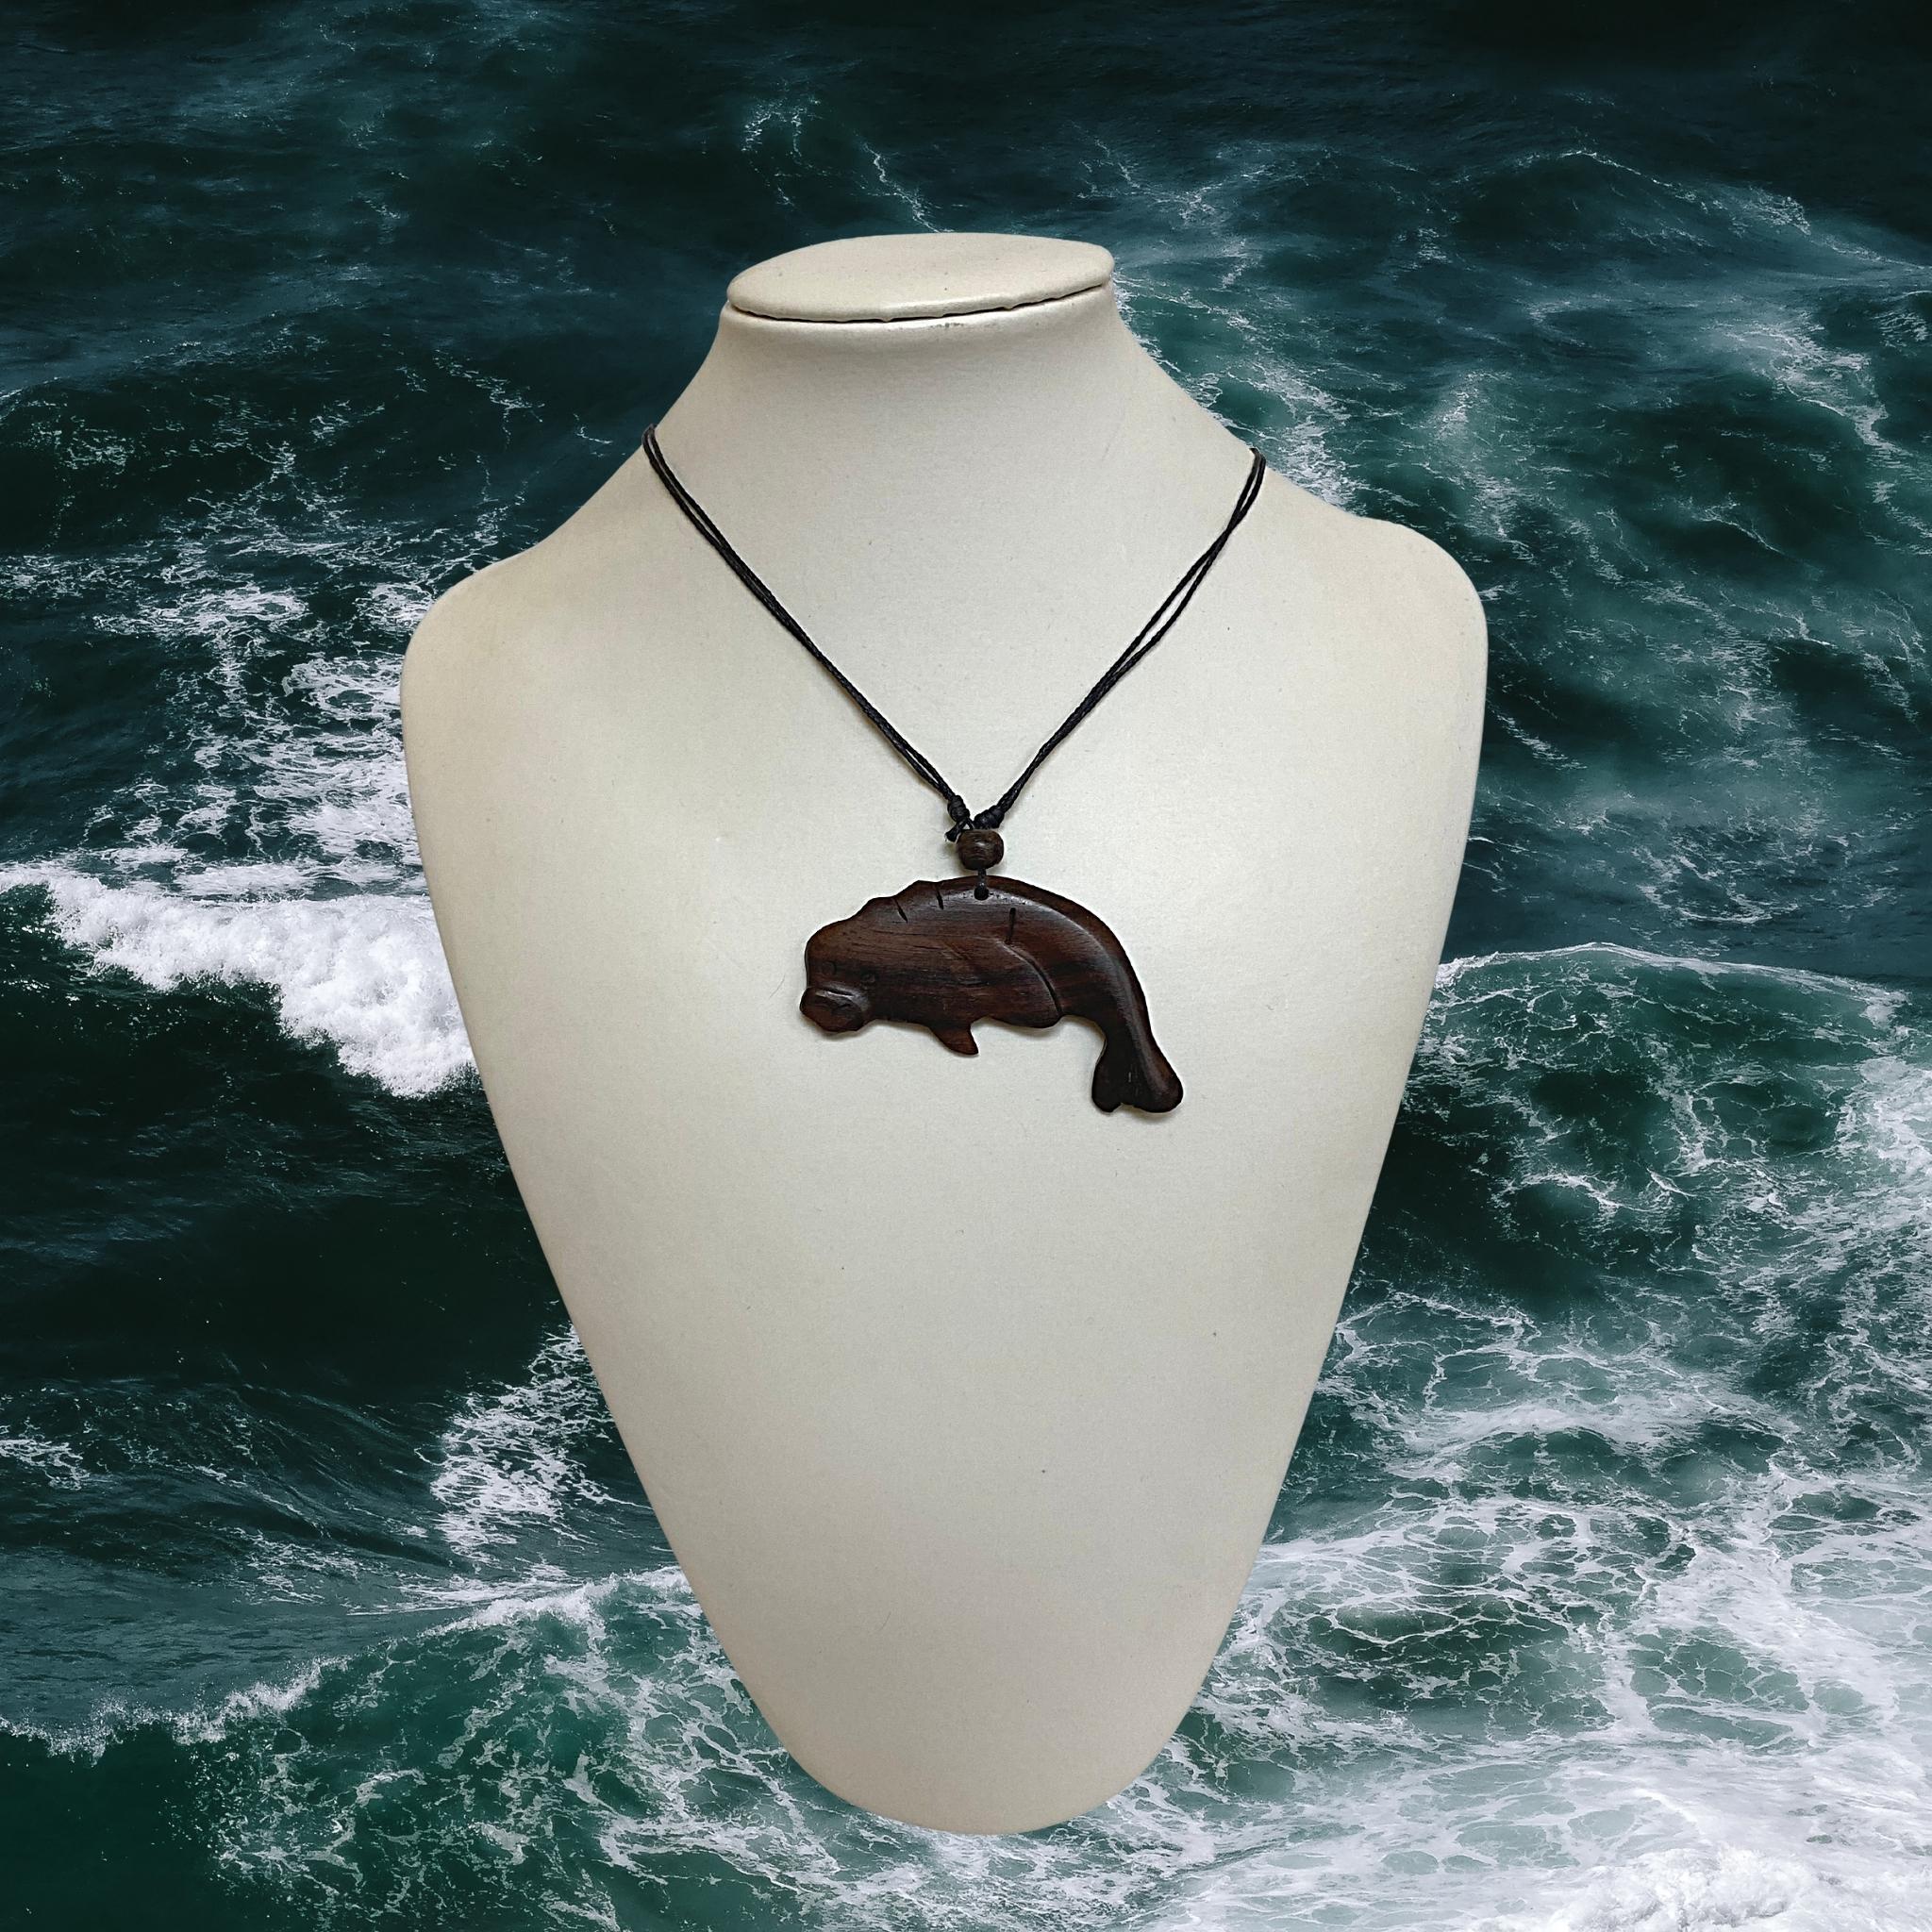 Wooden Carved Fish Necklace hand carved Ironwood Fish pendant Wood Necklace Sea Animal Nautical Wood Jewelry One of a Kind Gift for Him Her - Tobmarc Home Decor & Gifts 